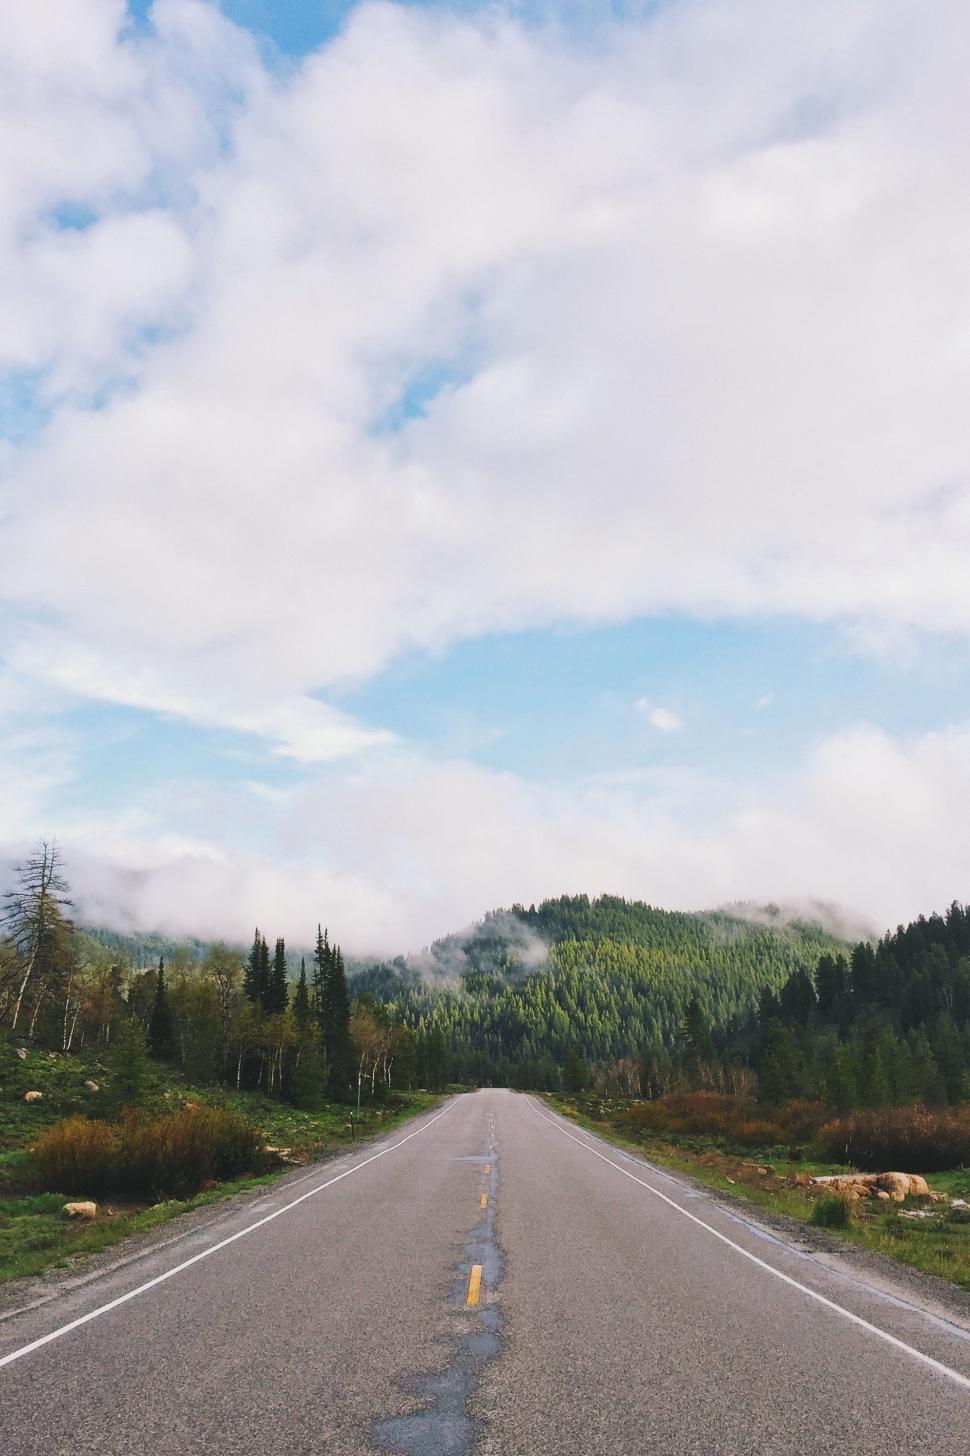 Free Image of Long Empty Road With Trees and Mountains 